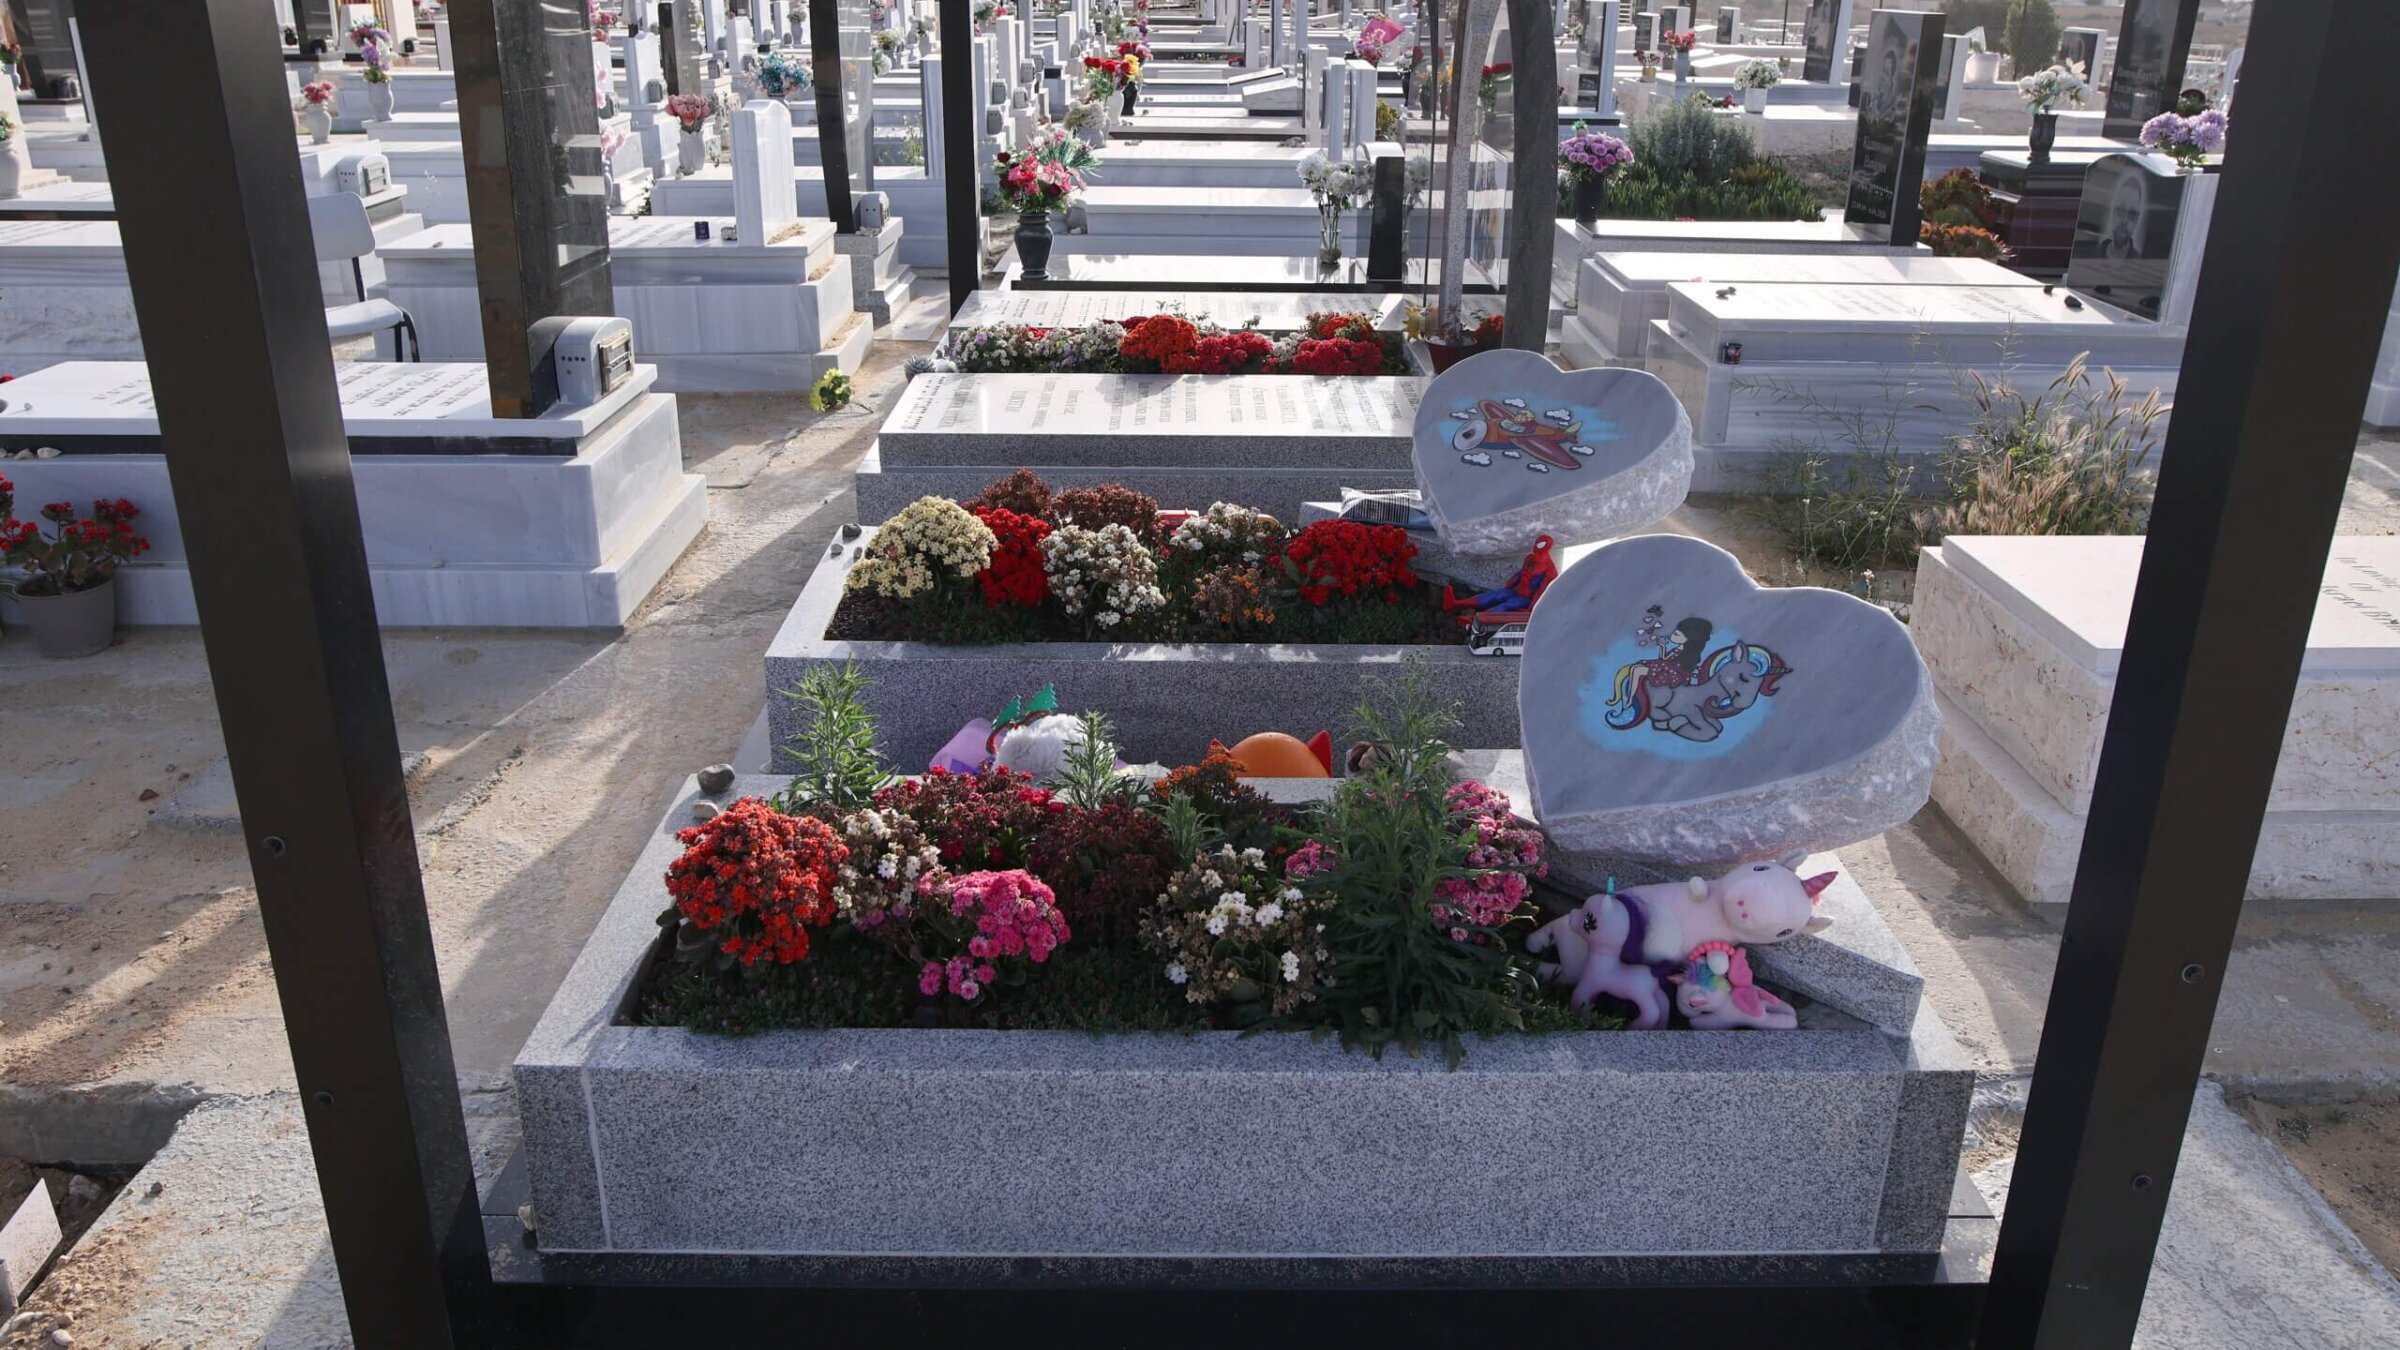 The graves of 8-year-old Aline Kapshitter and her 5-year-old brother, Eitan, outside the perimeter fence of the cemetery in Dimona.